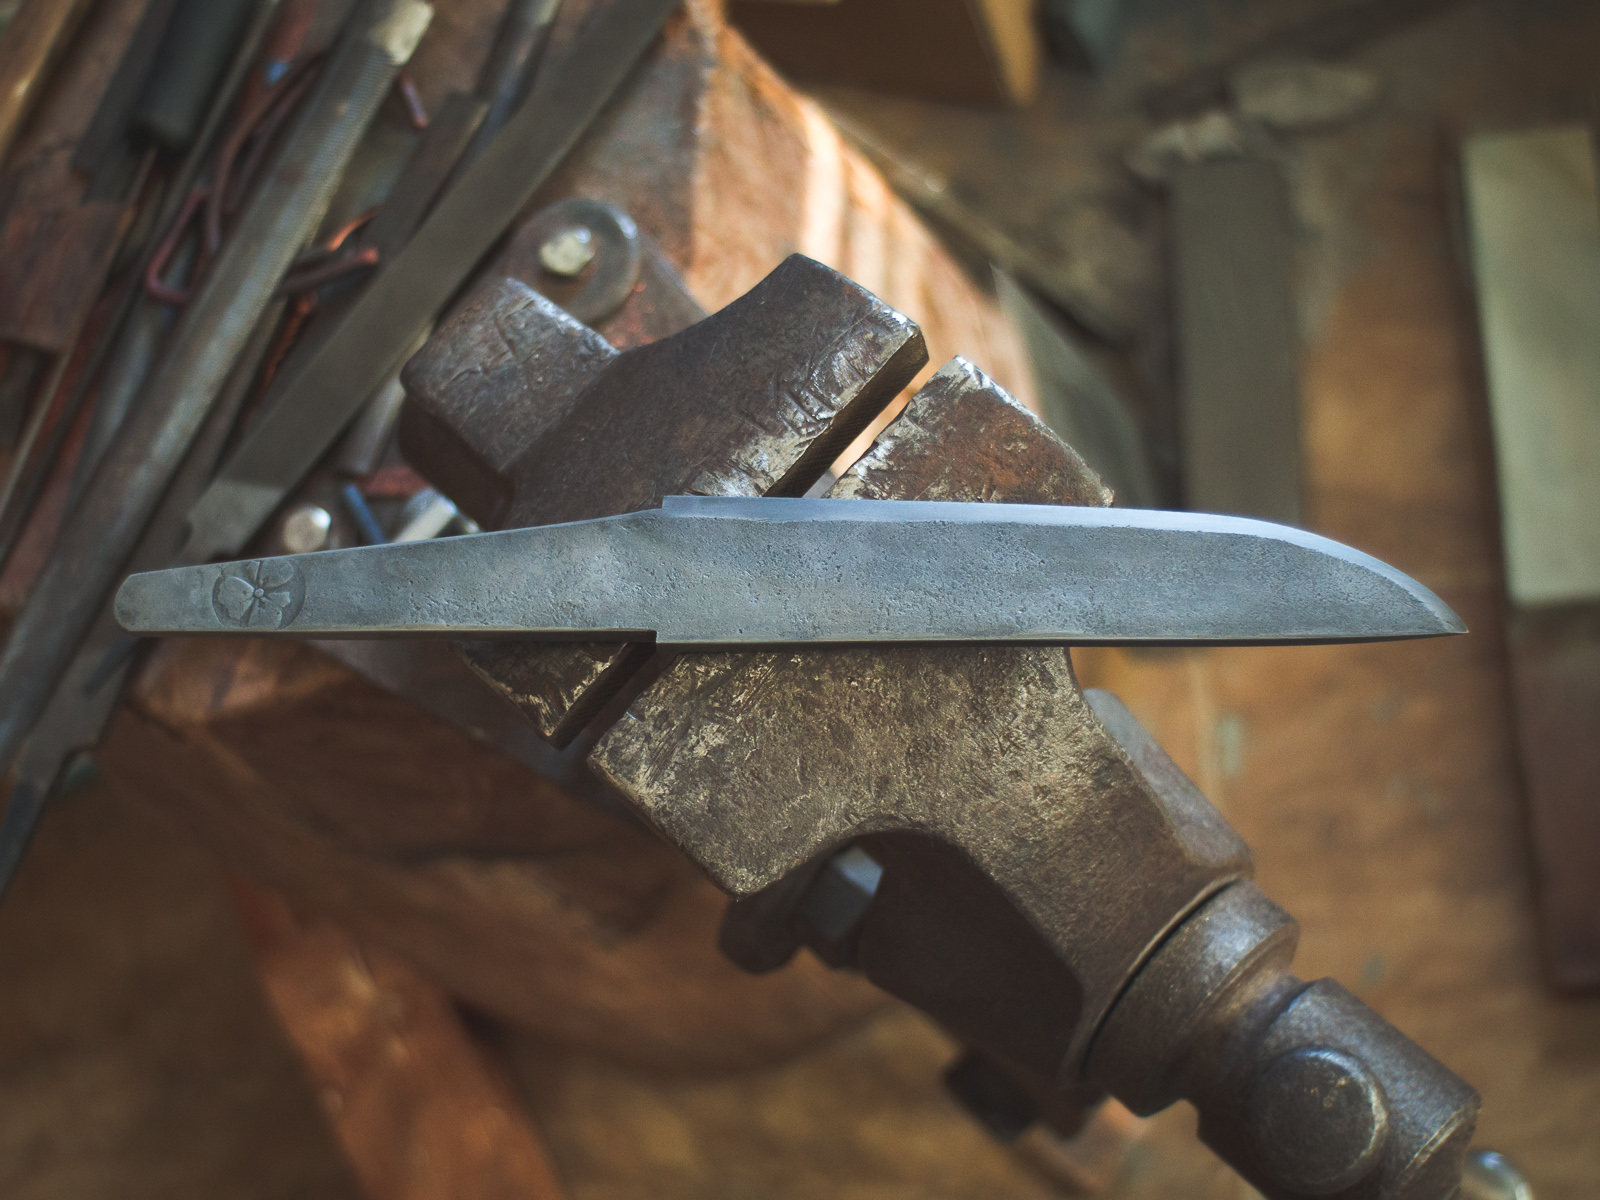 Island Blacksmith: Charcoal forged knives reclaimed from farm equipment.